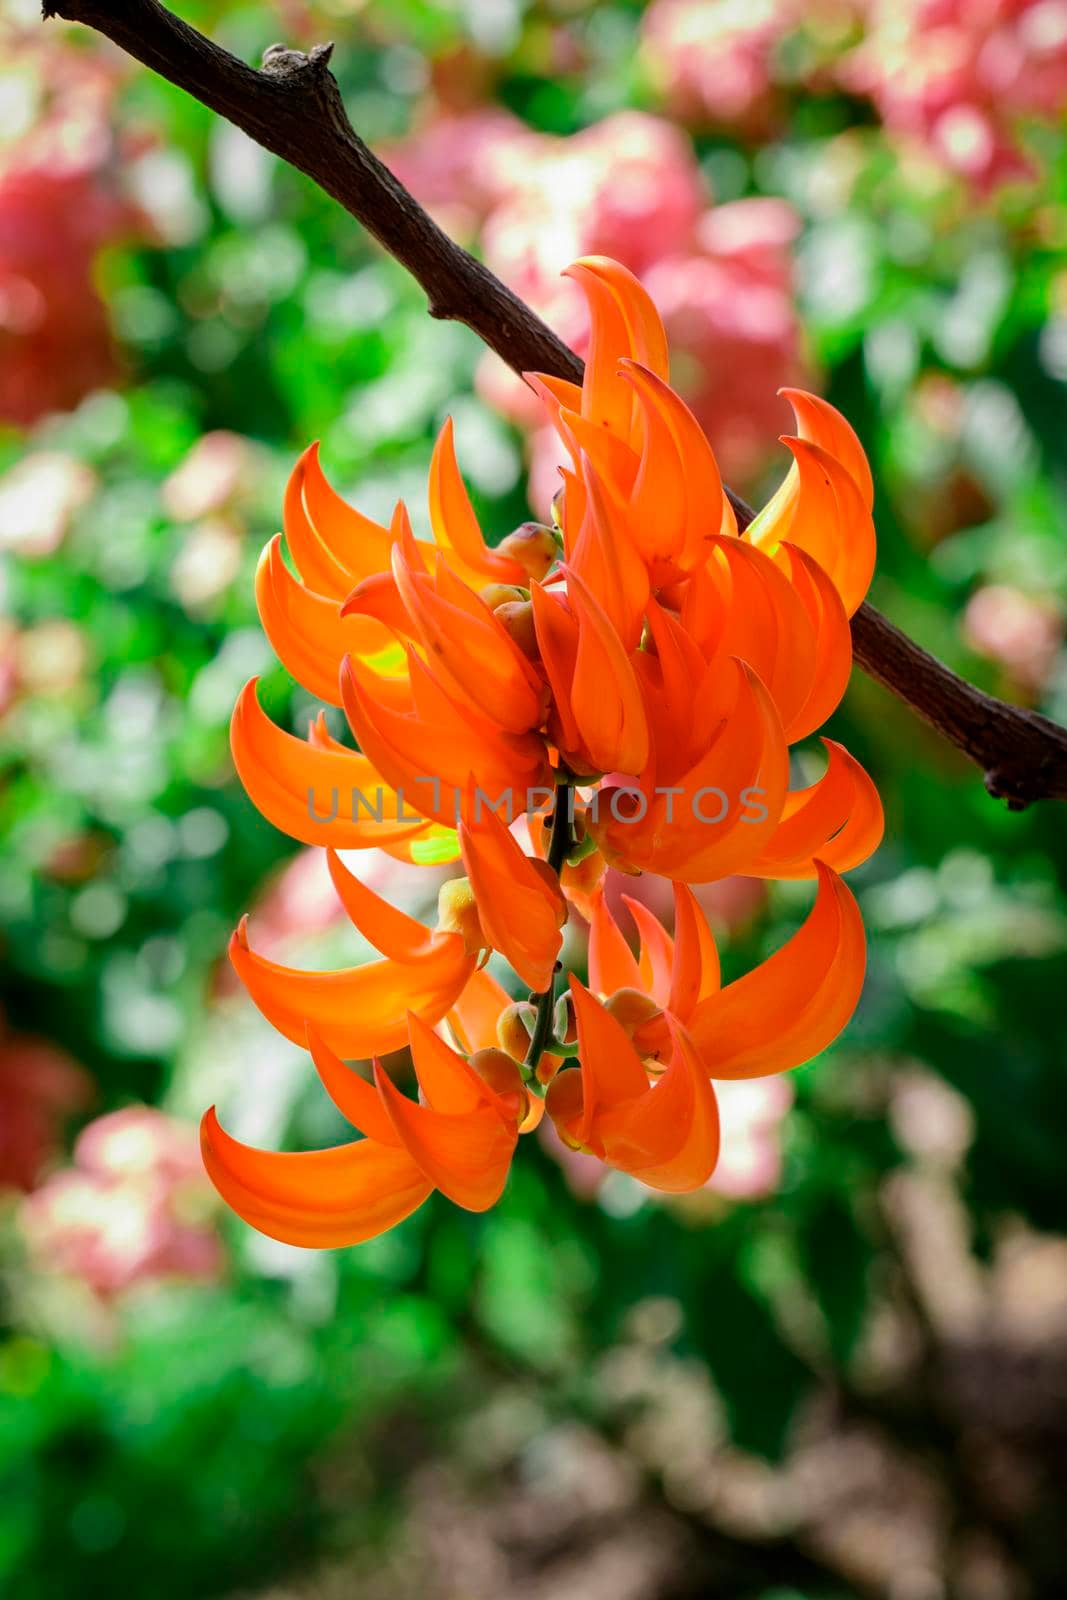 Flower of New Guinea creeper, Red Lade Vine in the garden by yod67